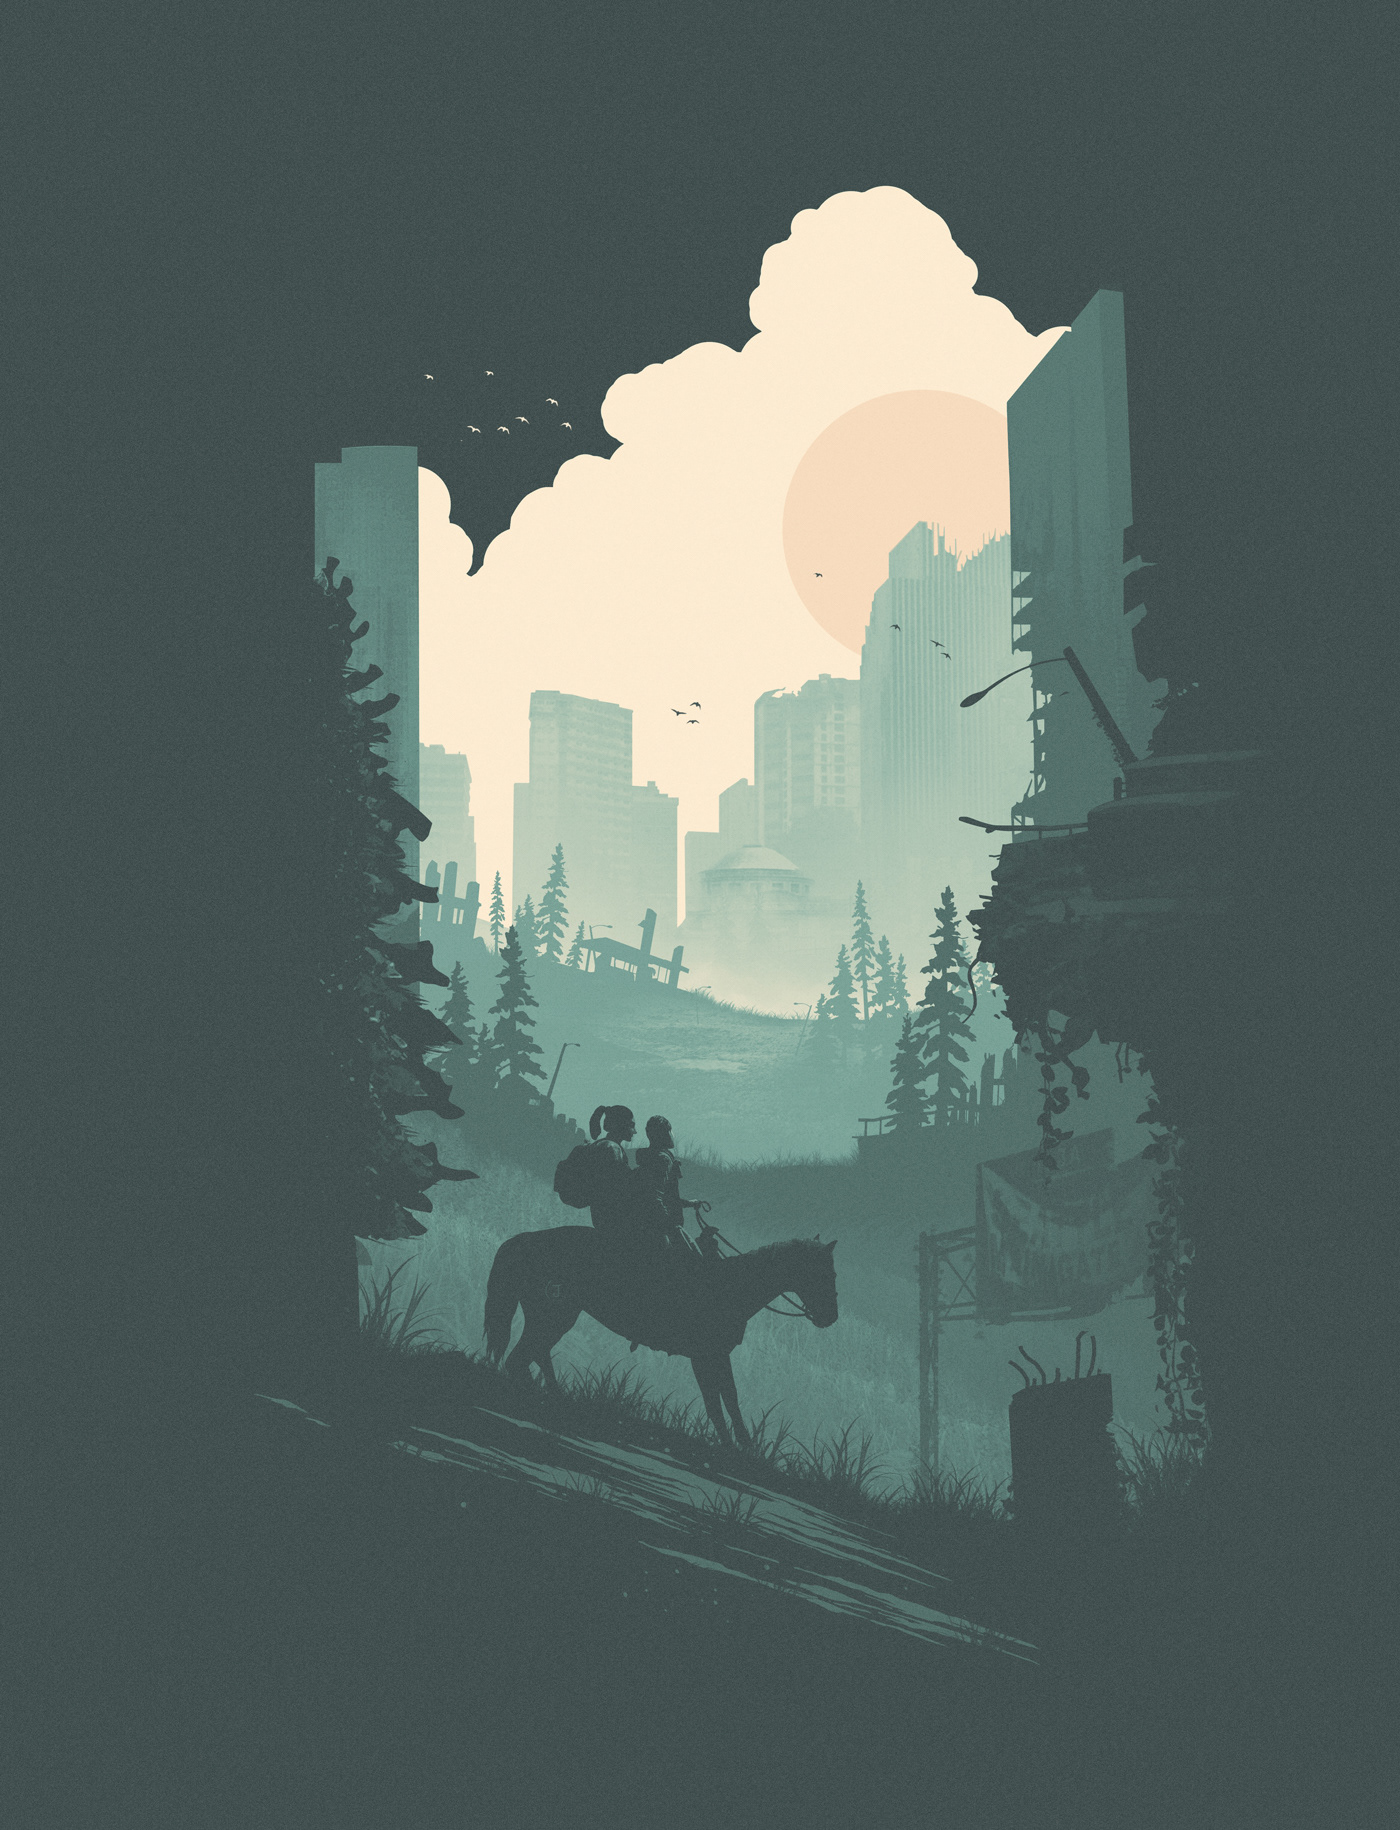 The Last of Us 2 Poster Series | Behance